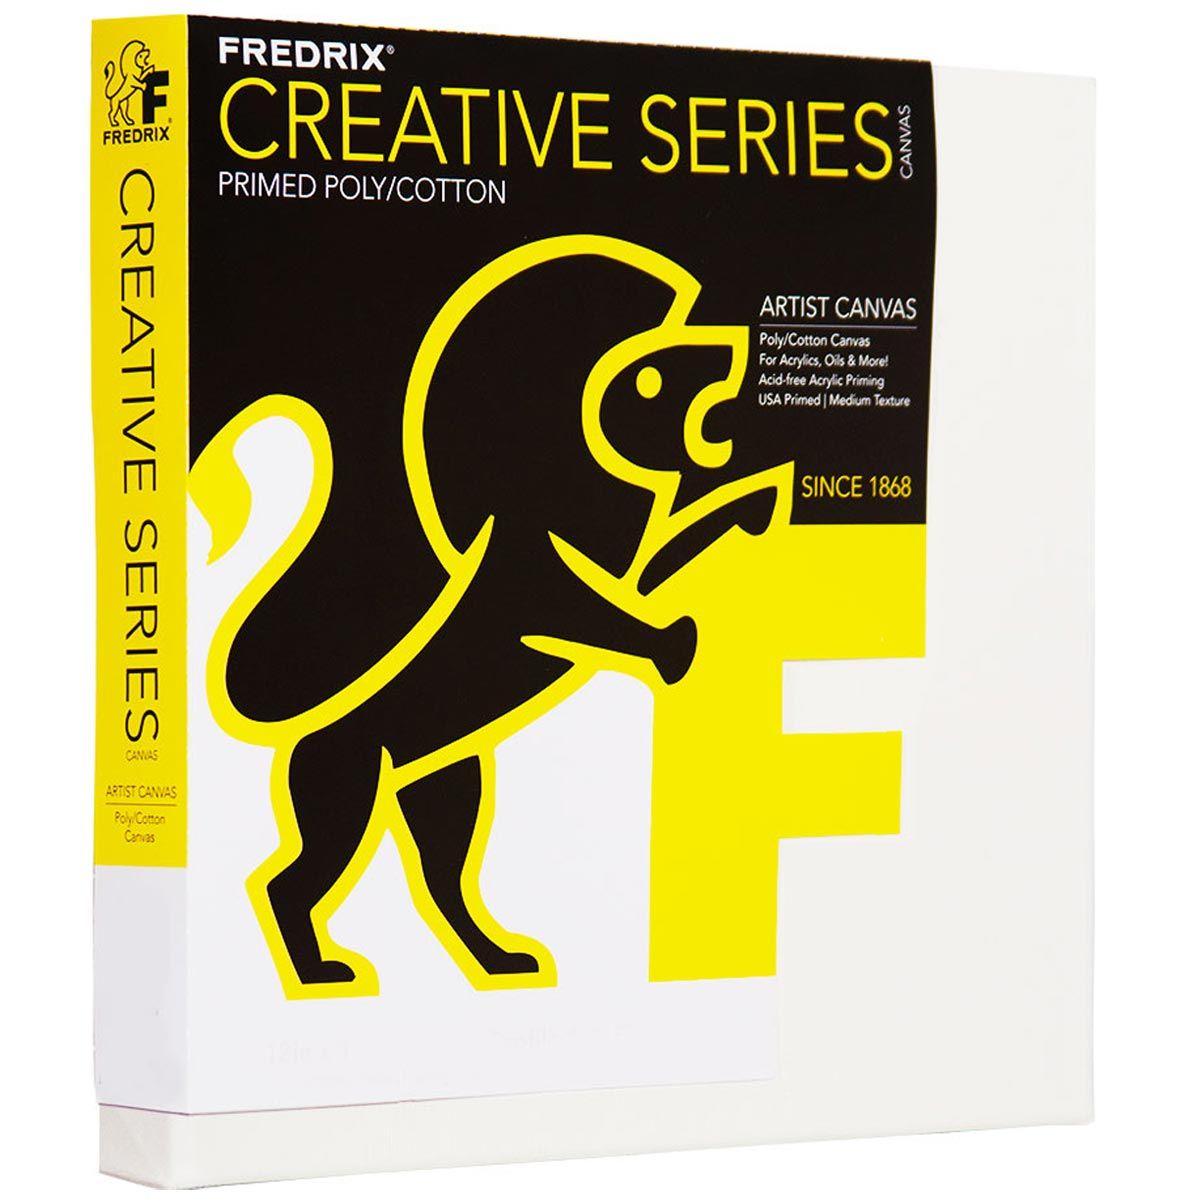 Creative Series Poly/Cotton Gallery Canvas 5 X 5 inches